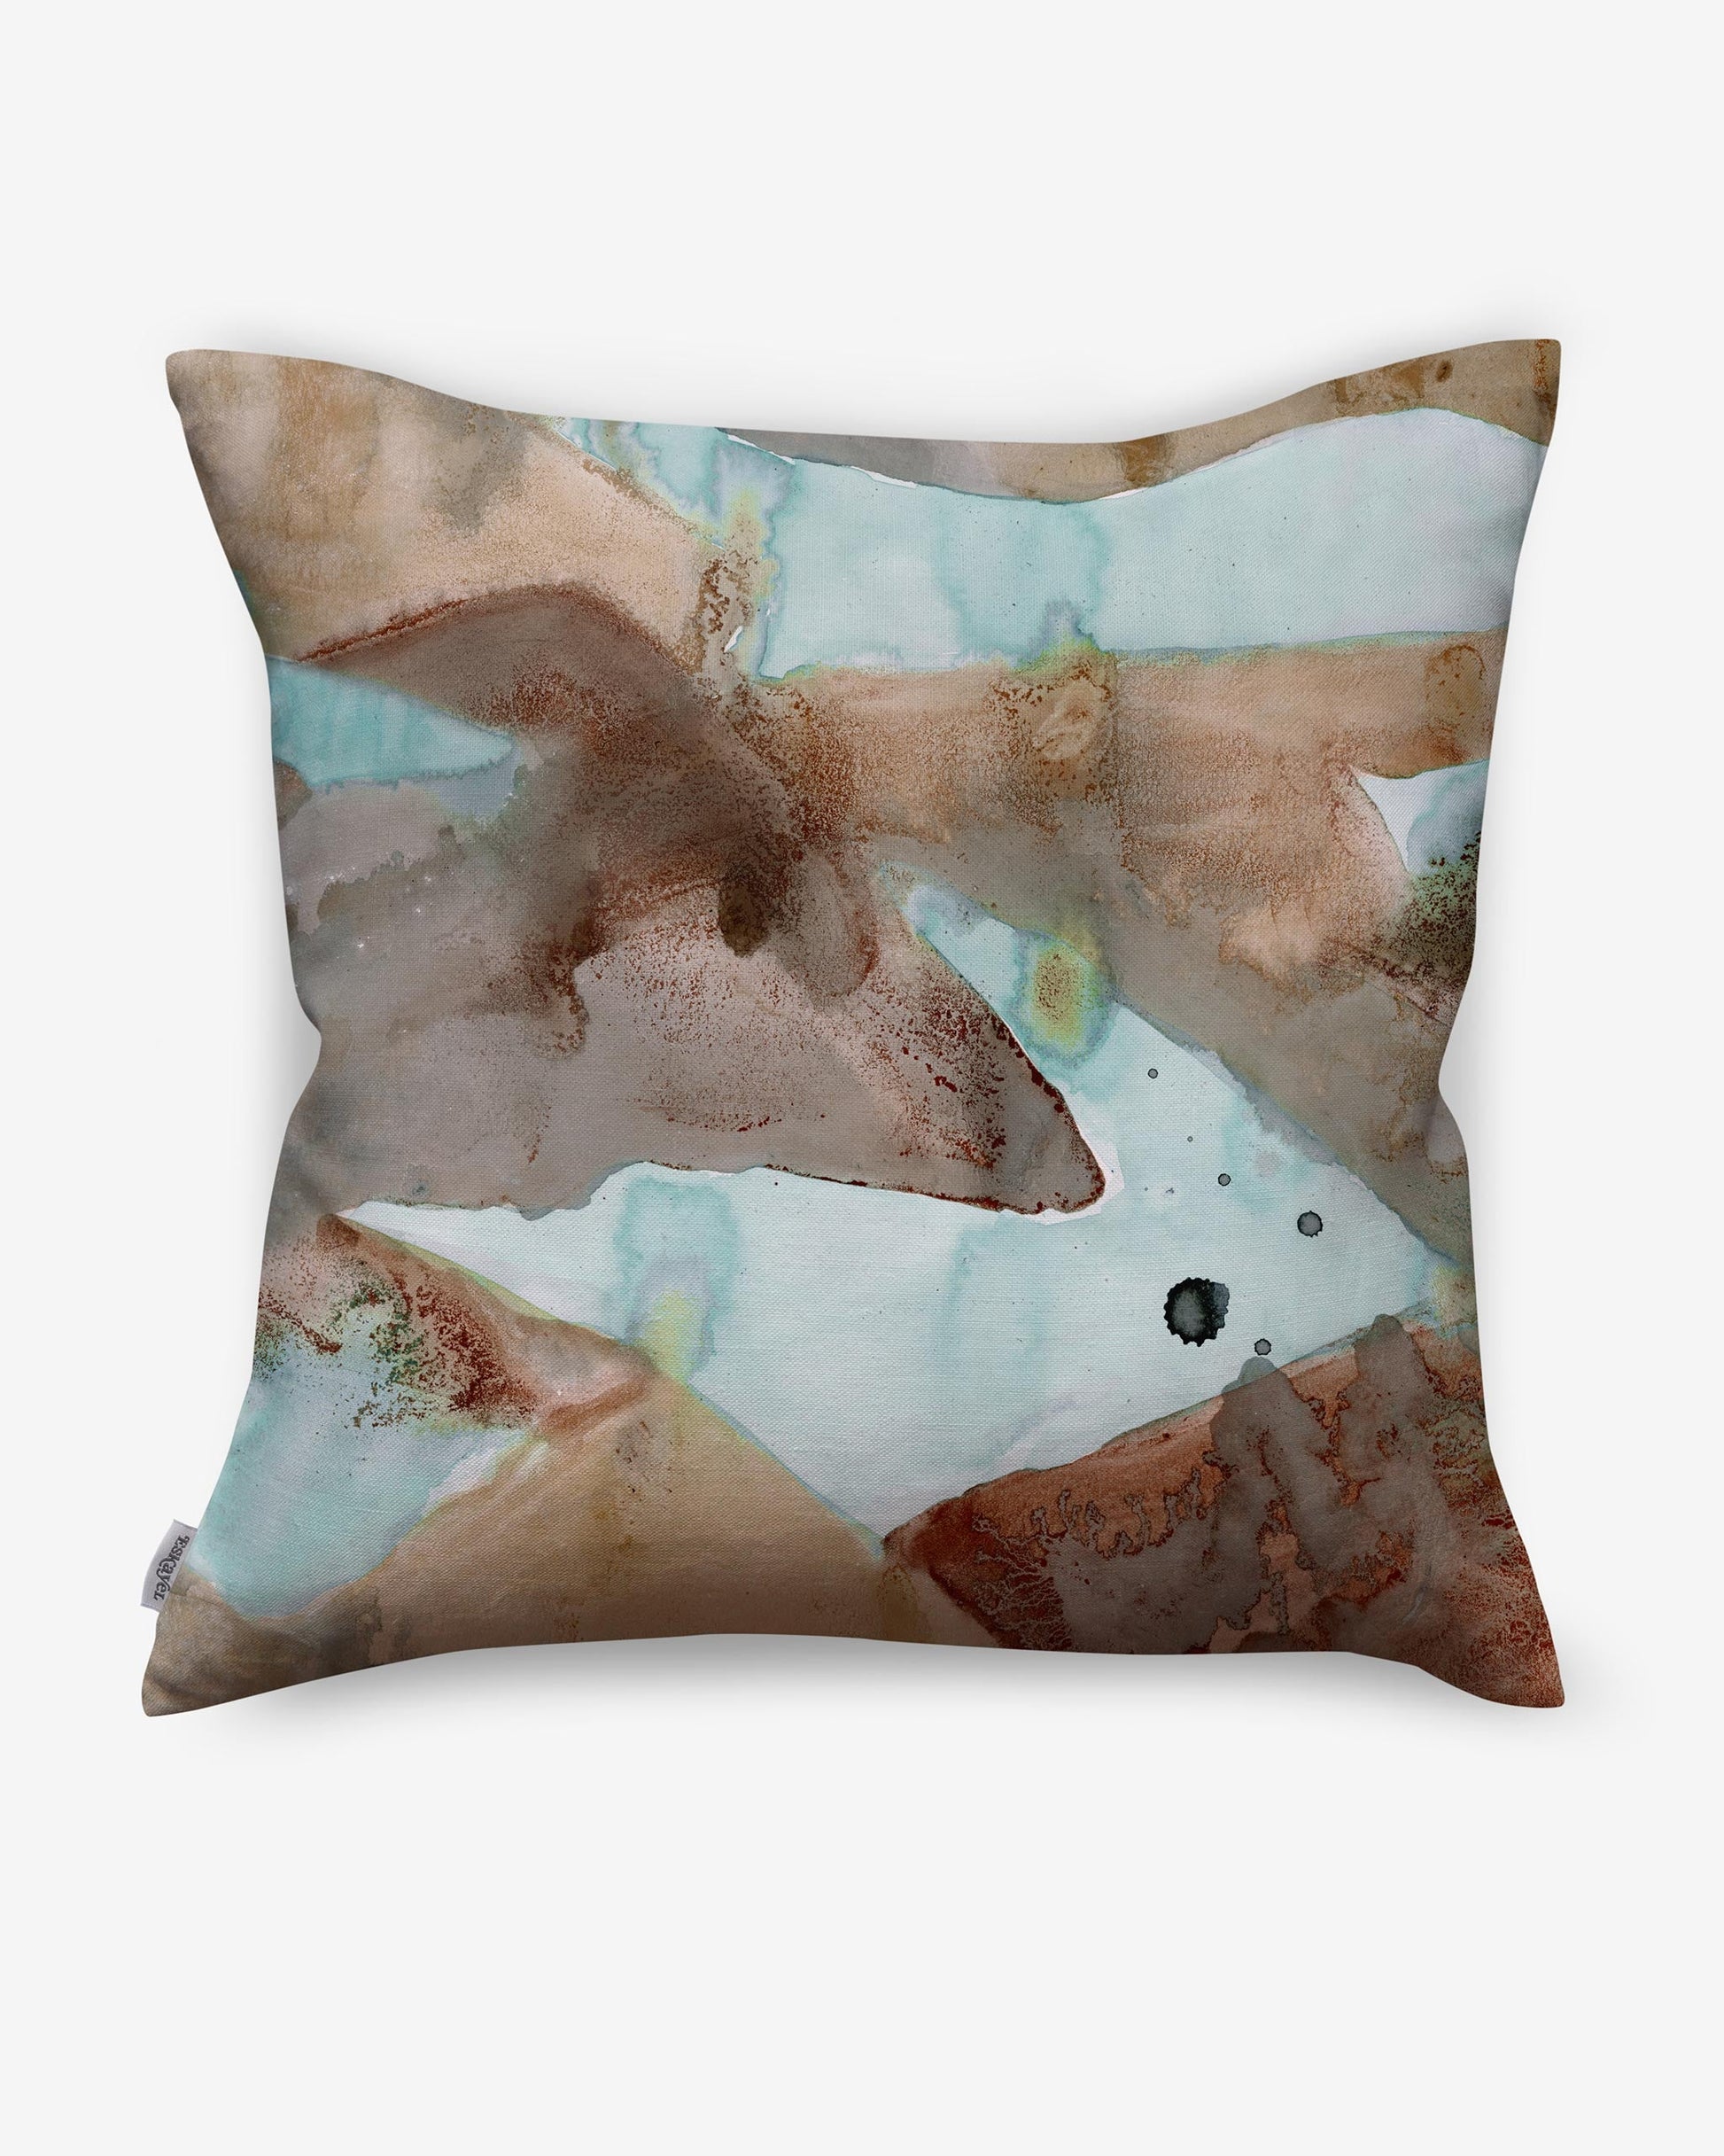 A Mani Pillow with a watercolor painting in Mani colorway